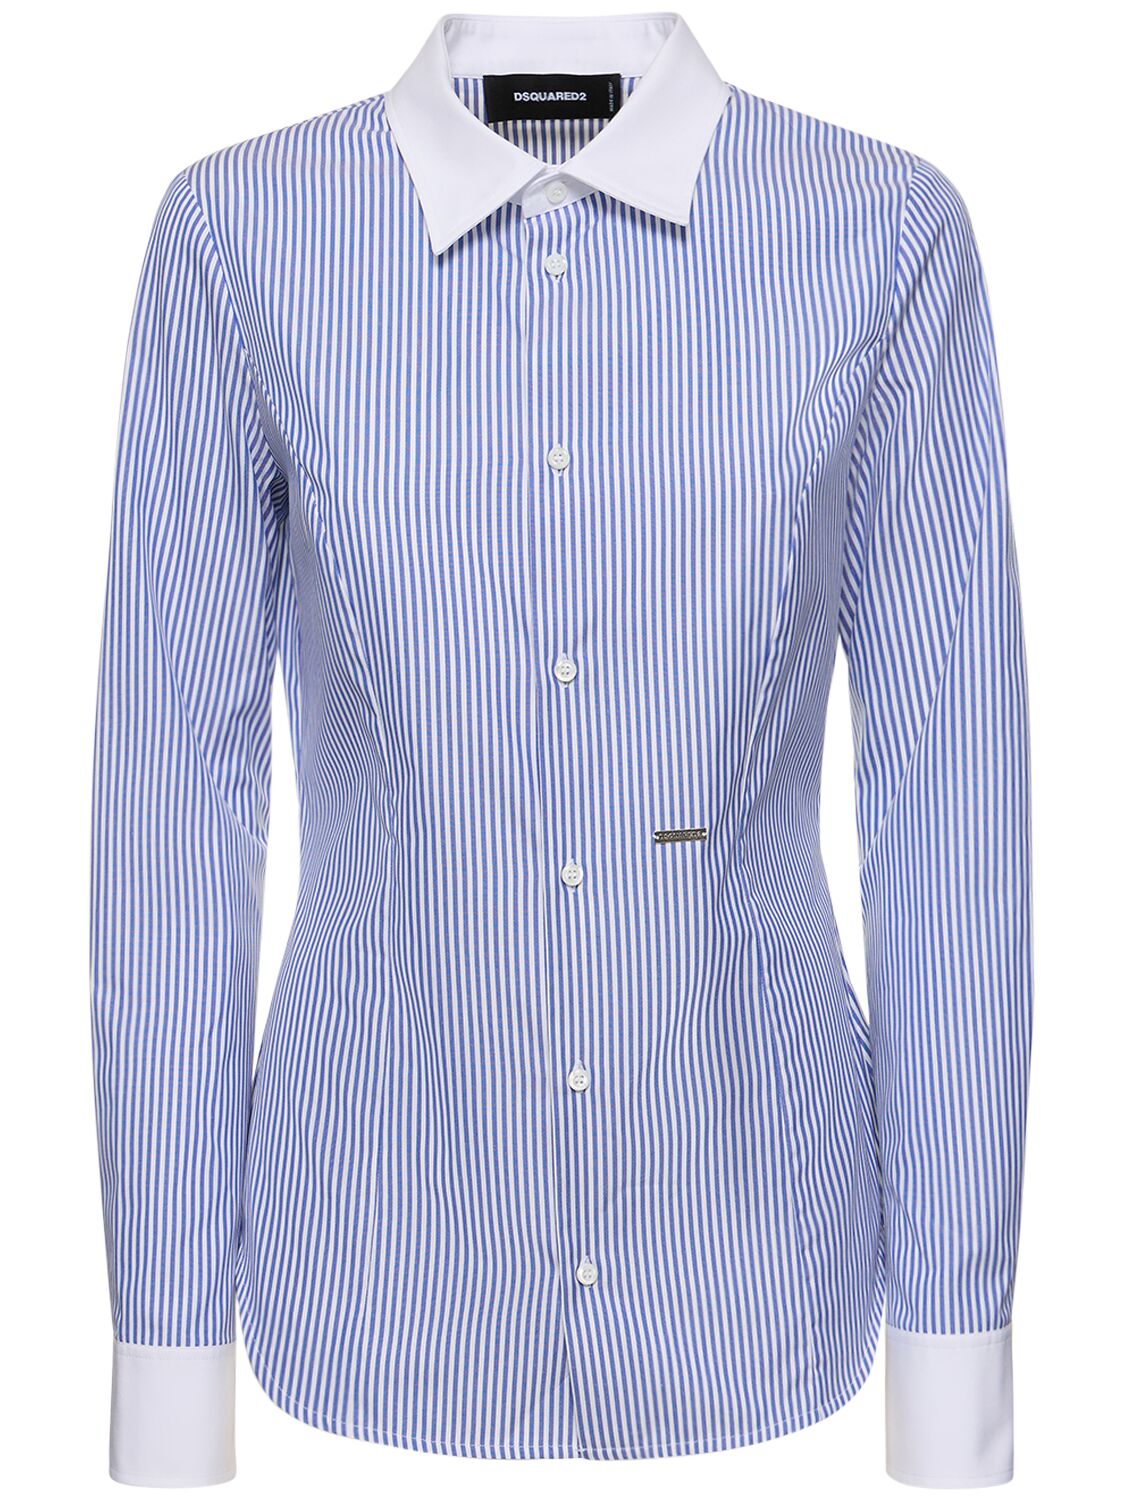 Image of Striped Cotton Shirt